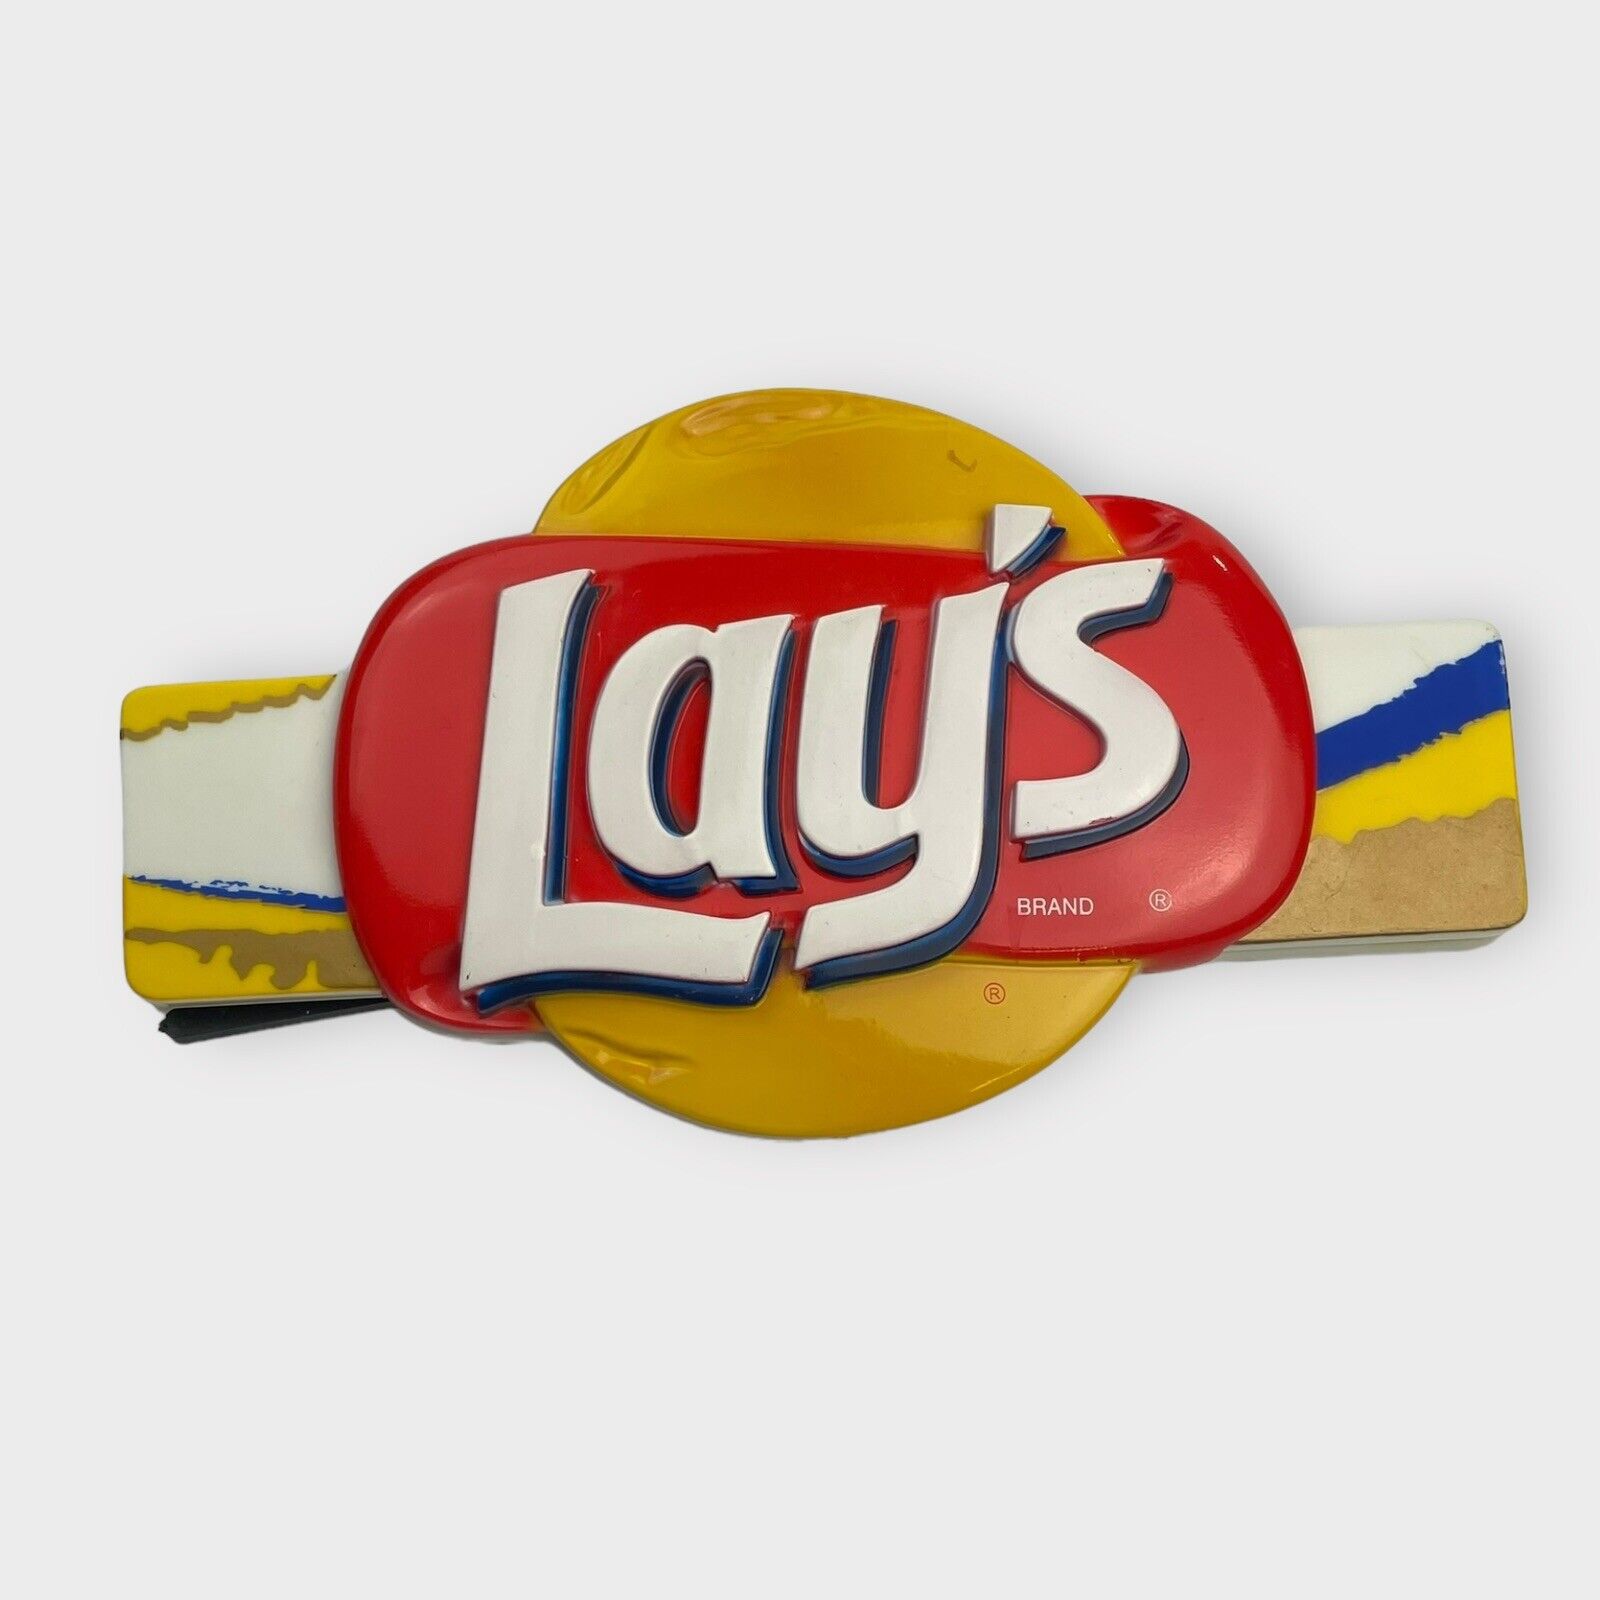 VTG Lays Promotional Chip Bag Clip Magnetic Fridge Magnet 2000s Yellow Red